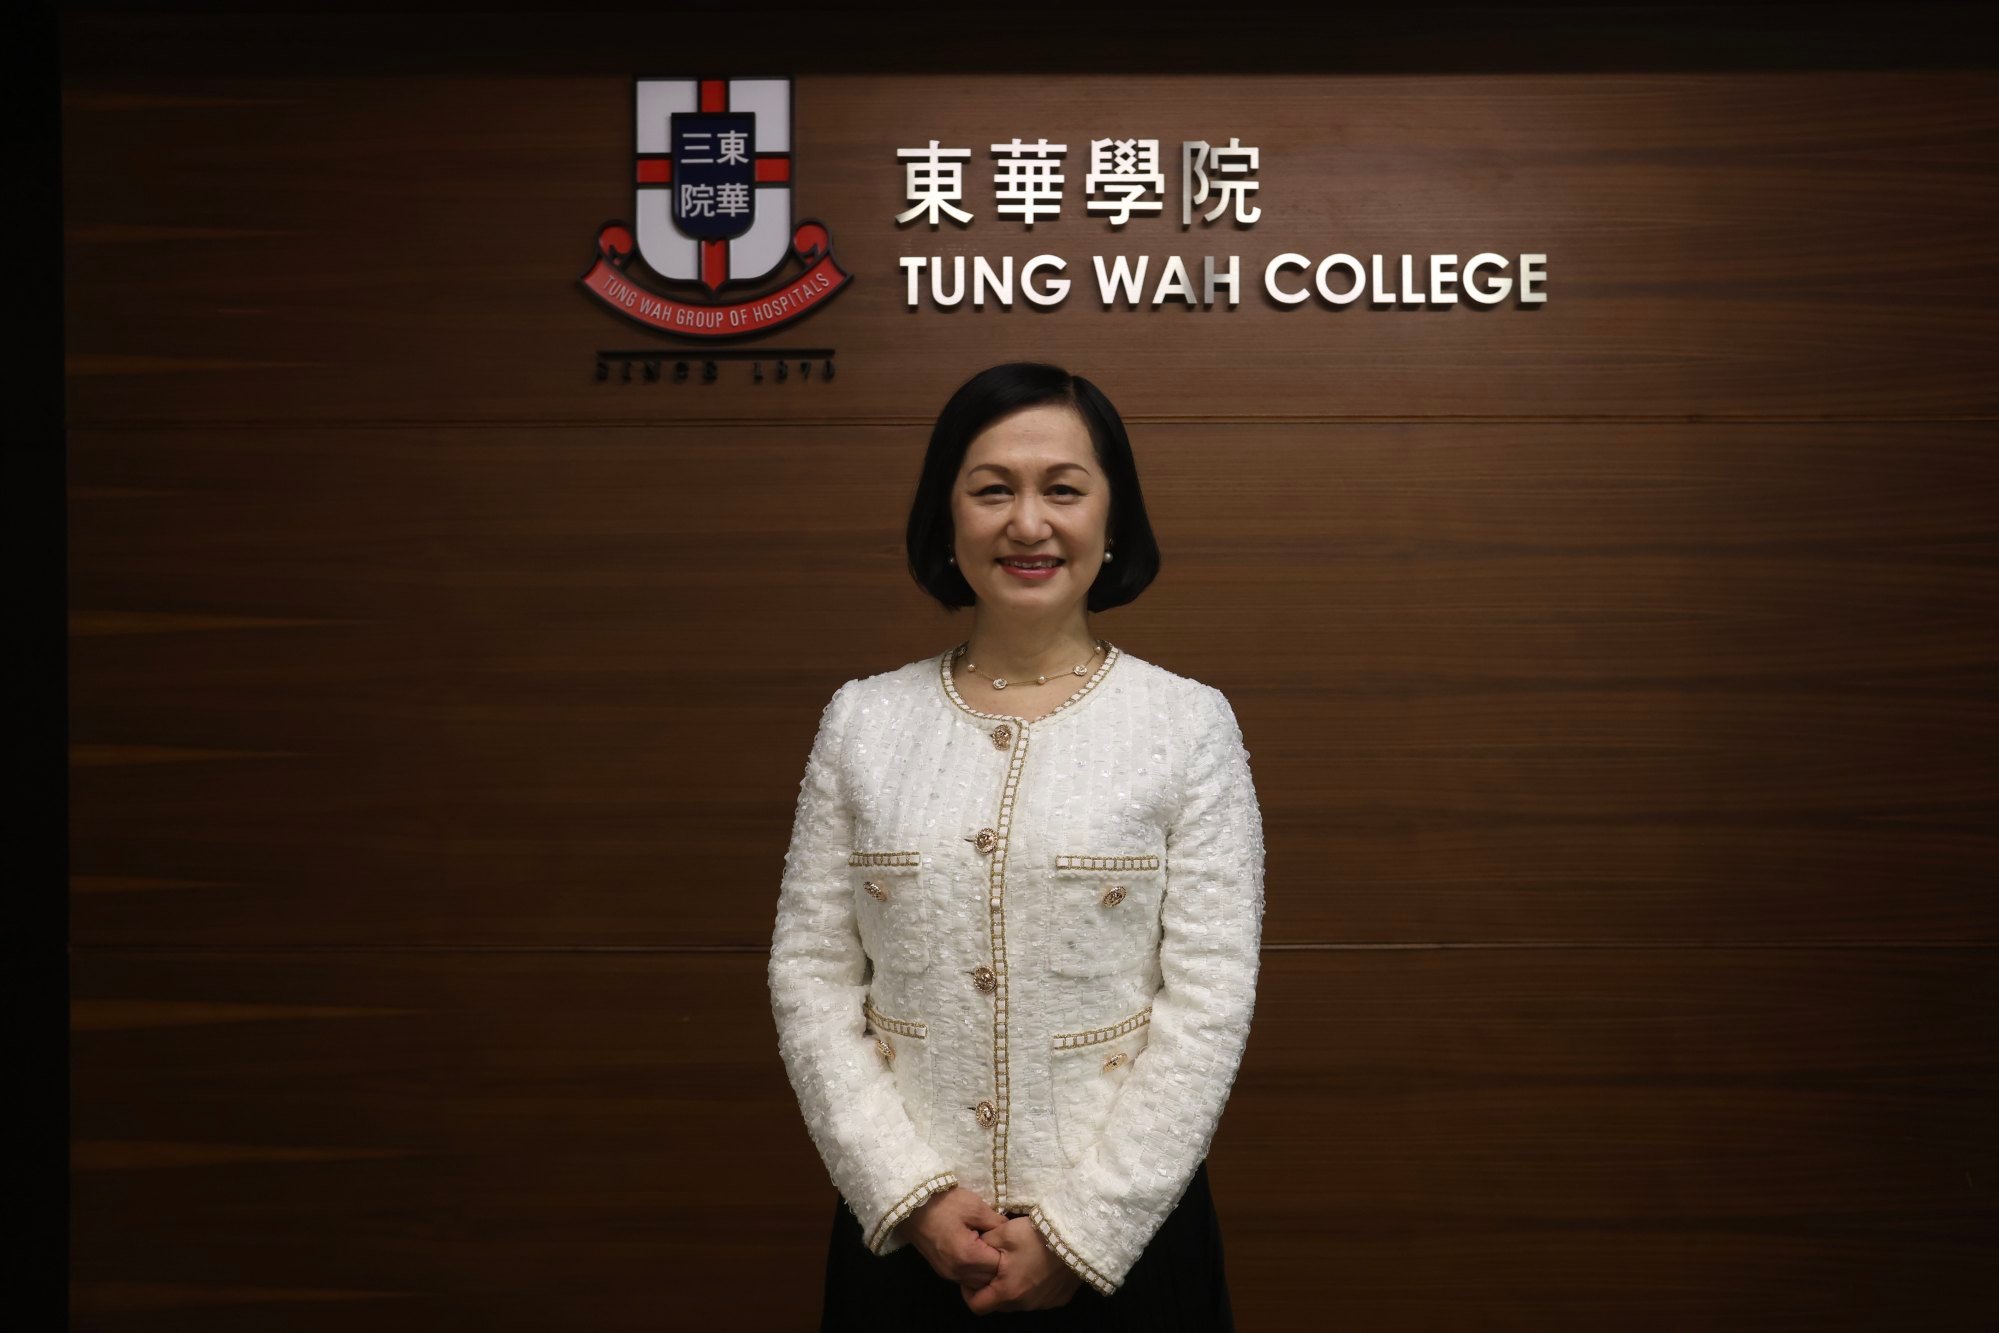 Sally Chan, president of Tung Wah College, says research universities and UAS are equal but have different missions. Photo: Jonathan Wong